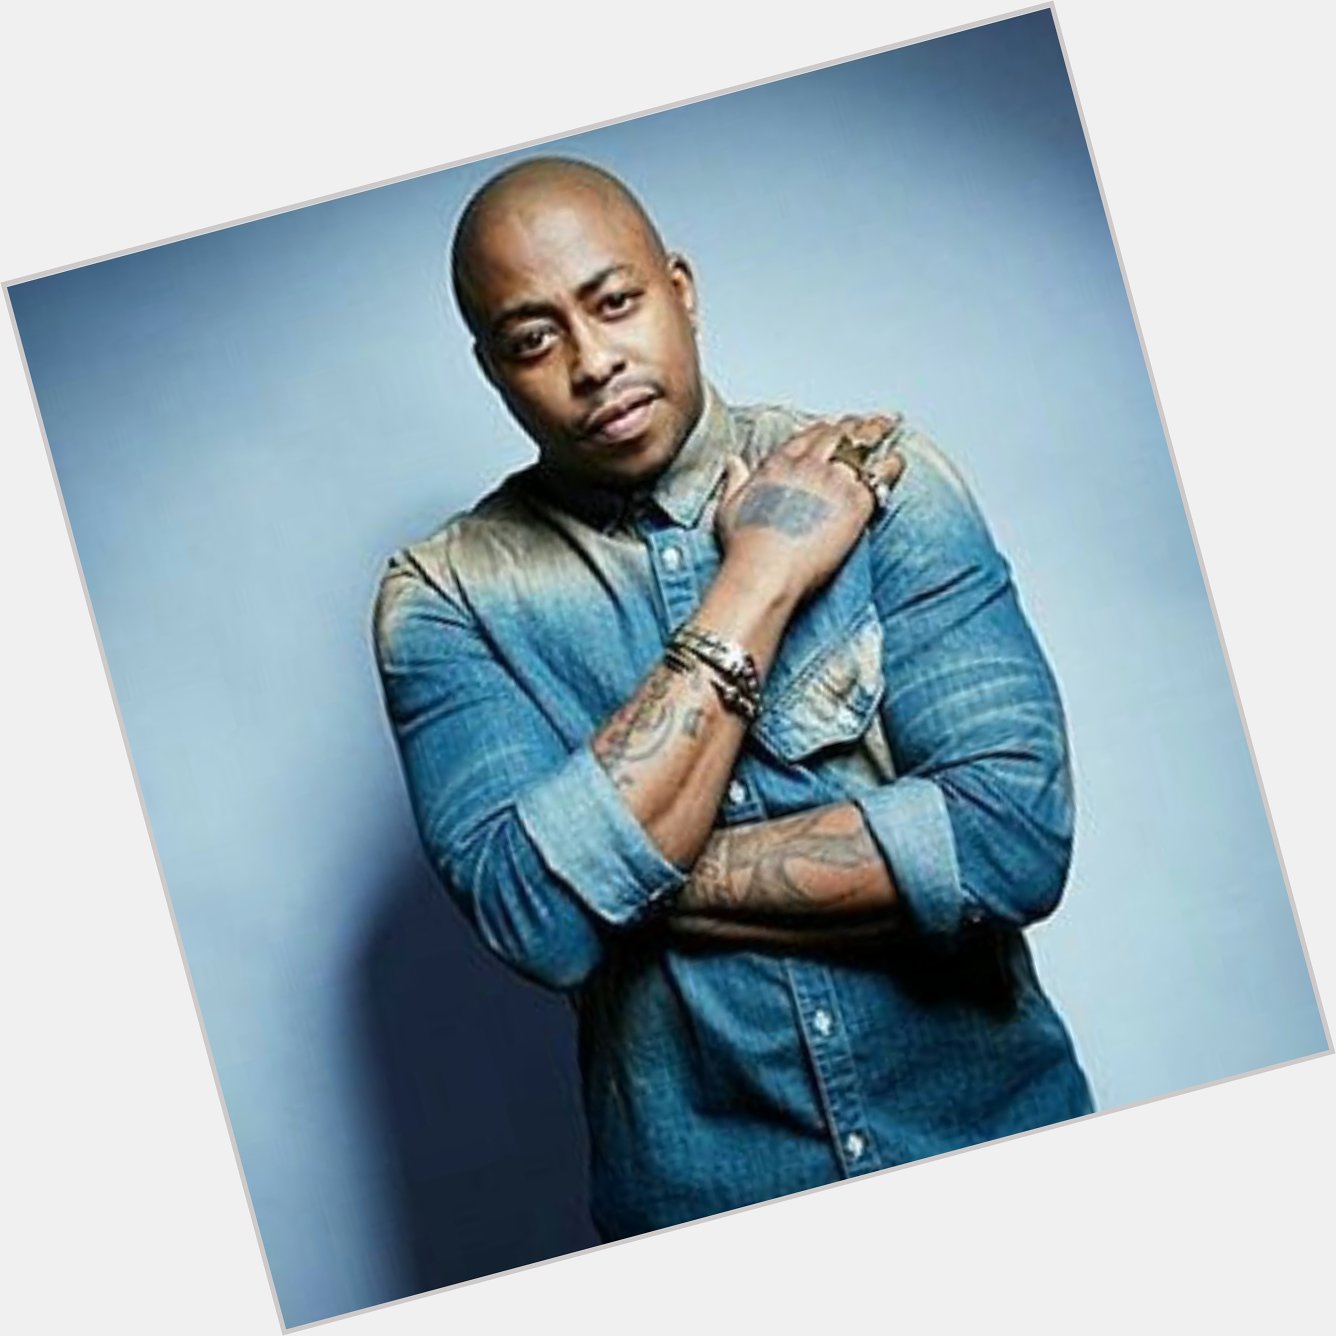 Happy birthday to my love king!! It\s Raheem devaughn Day.. be blessed Boo 